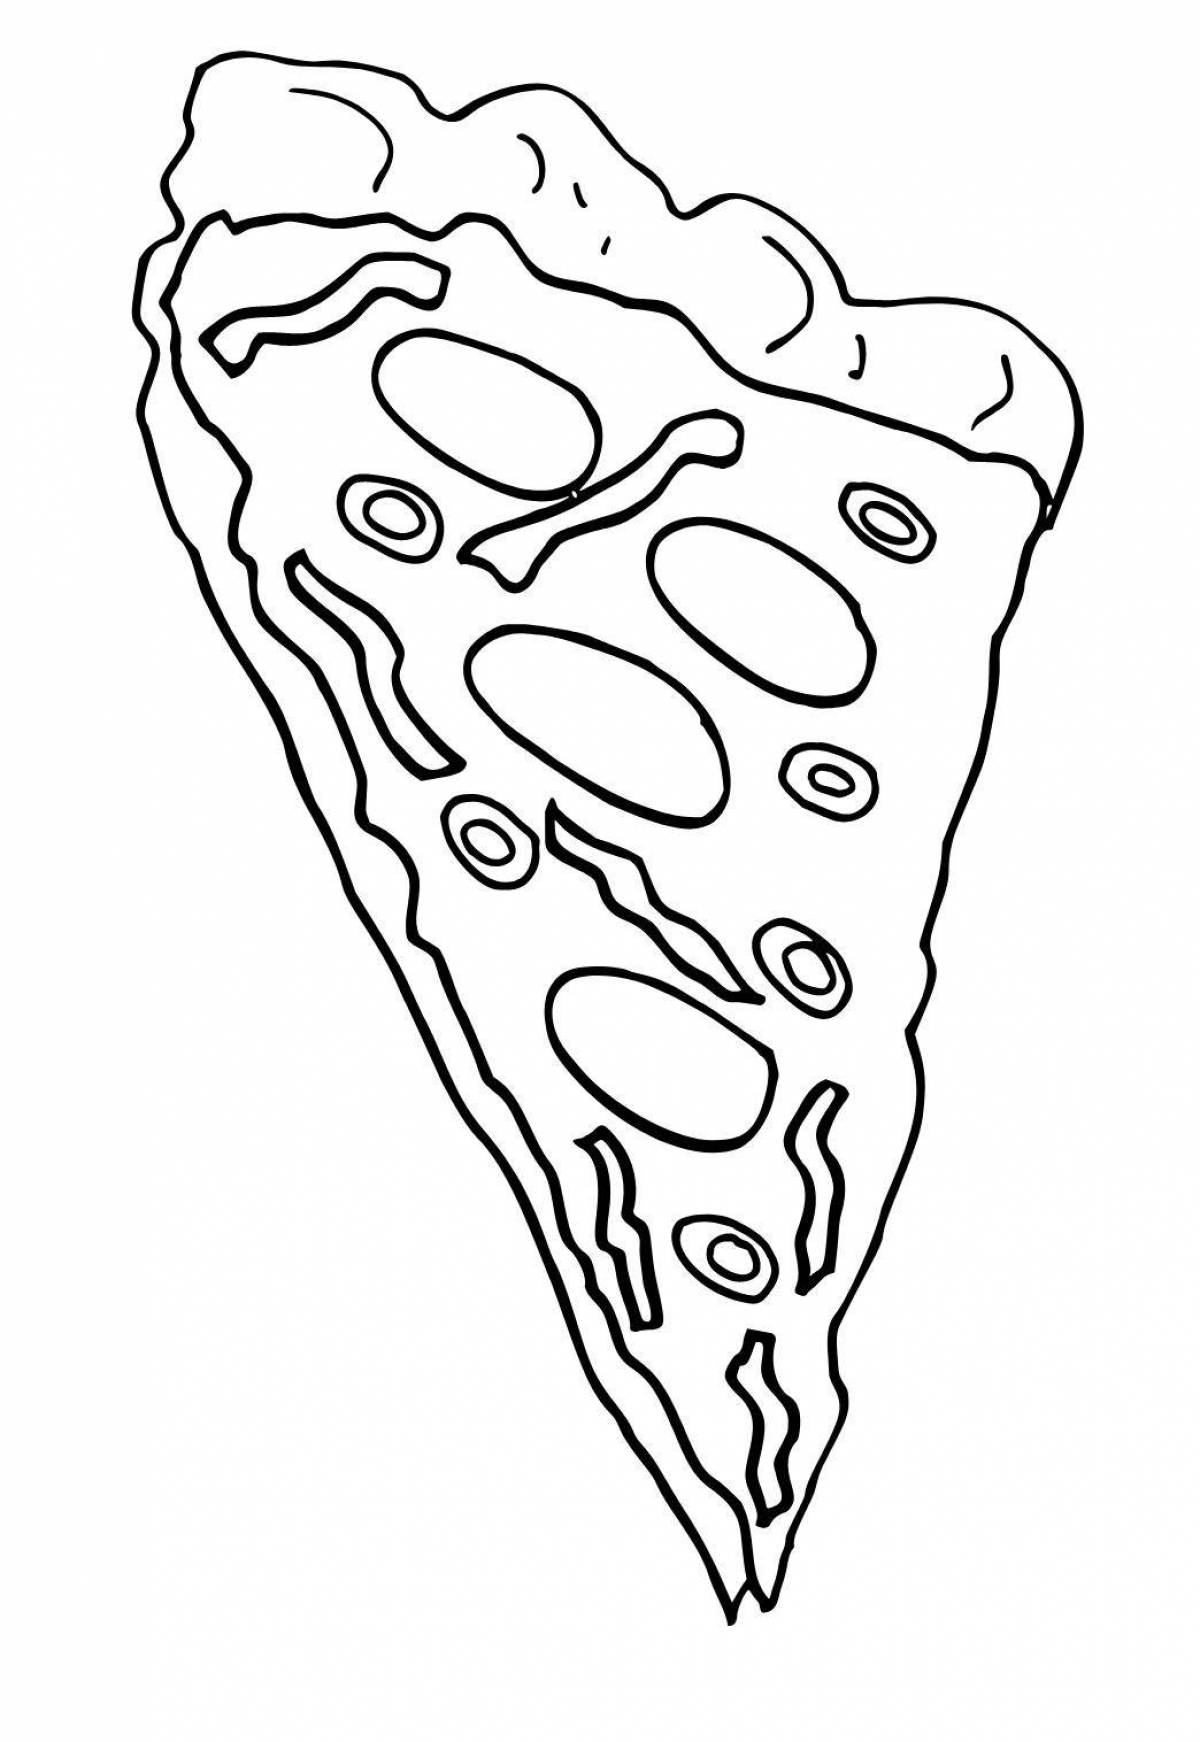 Spicy coloring pizza slice